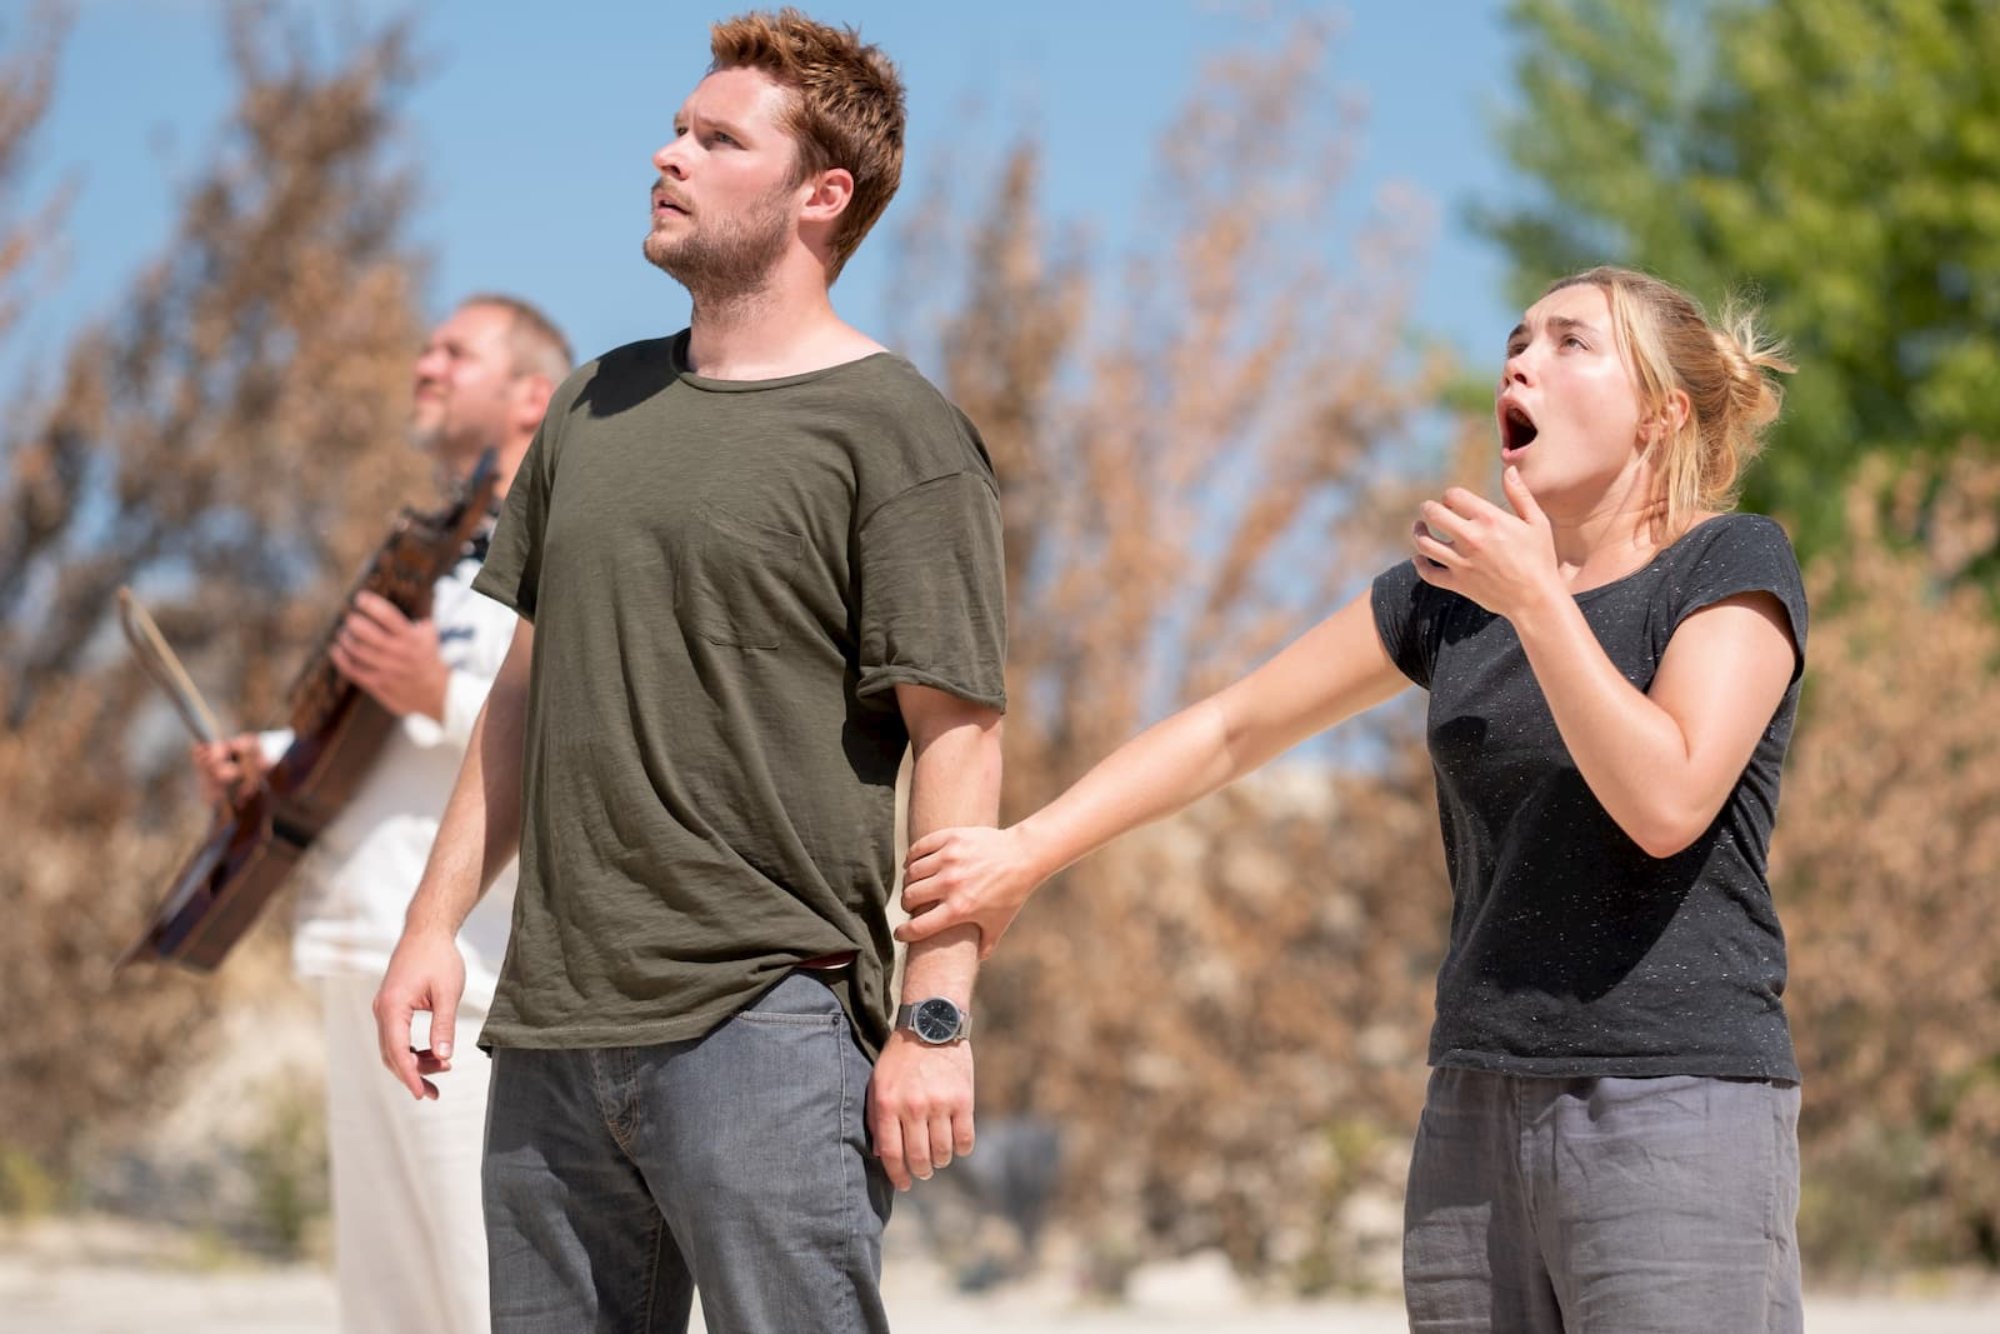 'Midsommar' Jack Reynor as Christian and Florence Pugh as Dani, inspiring an A24 theme park. Pugh holding Reynor's arm looking up in shock.